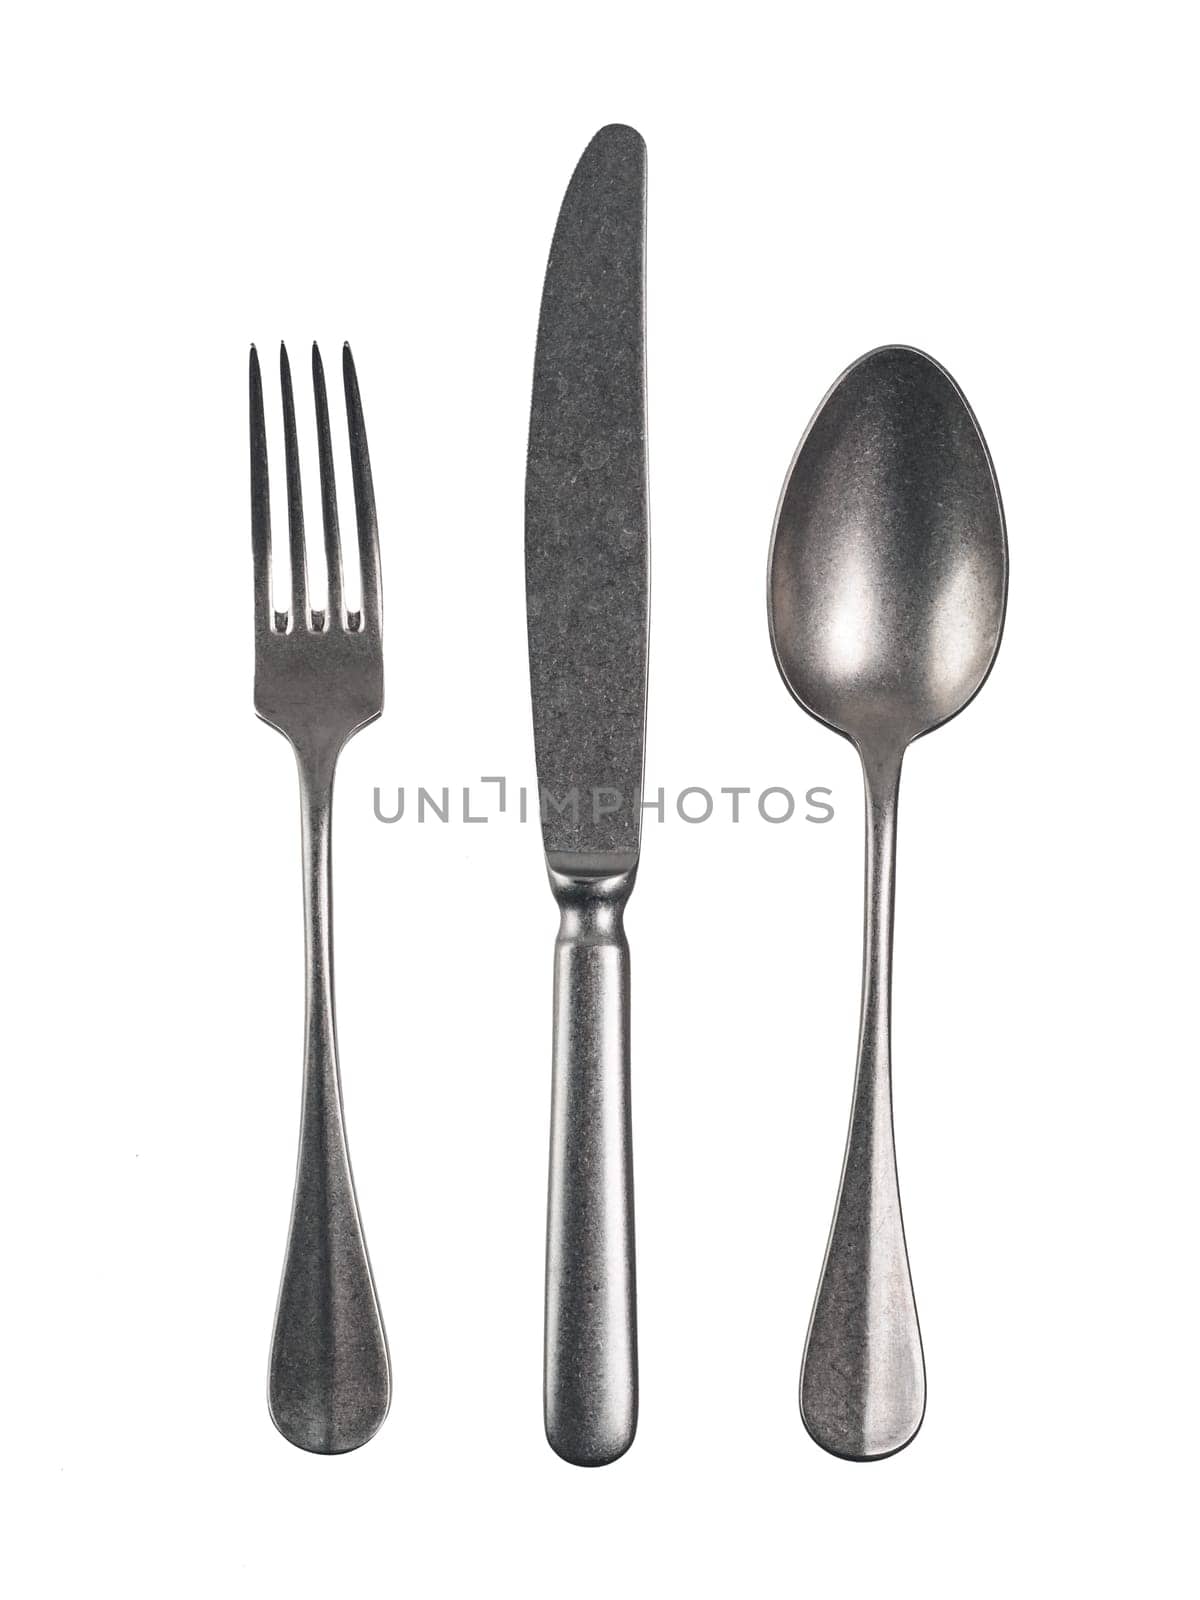 Cutlery set isolated on white background by fascinadora